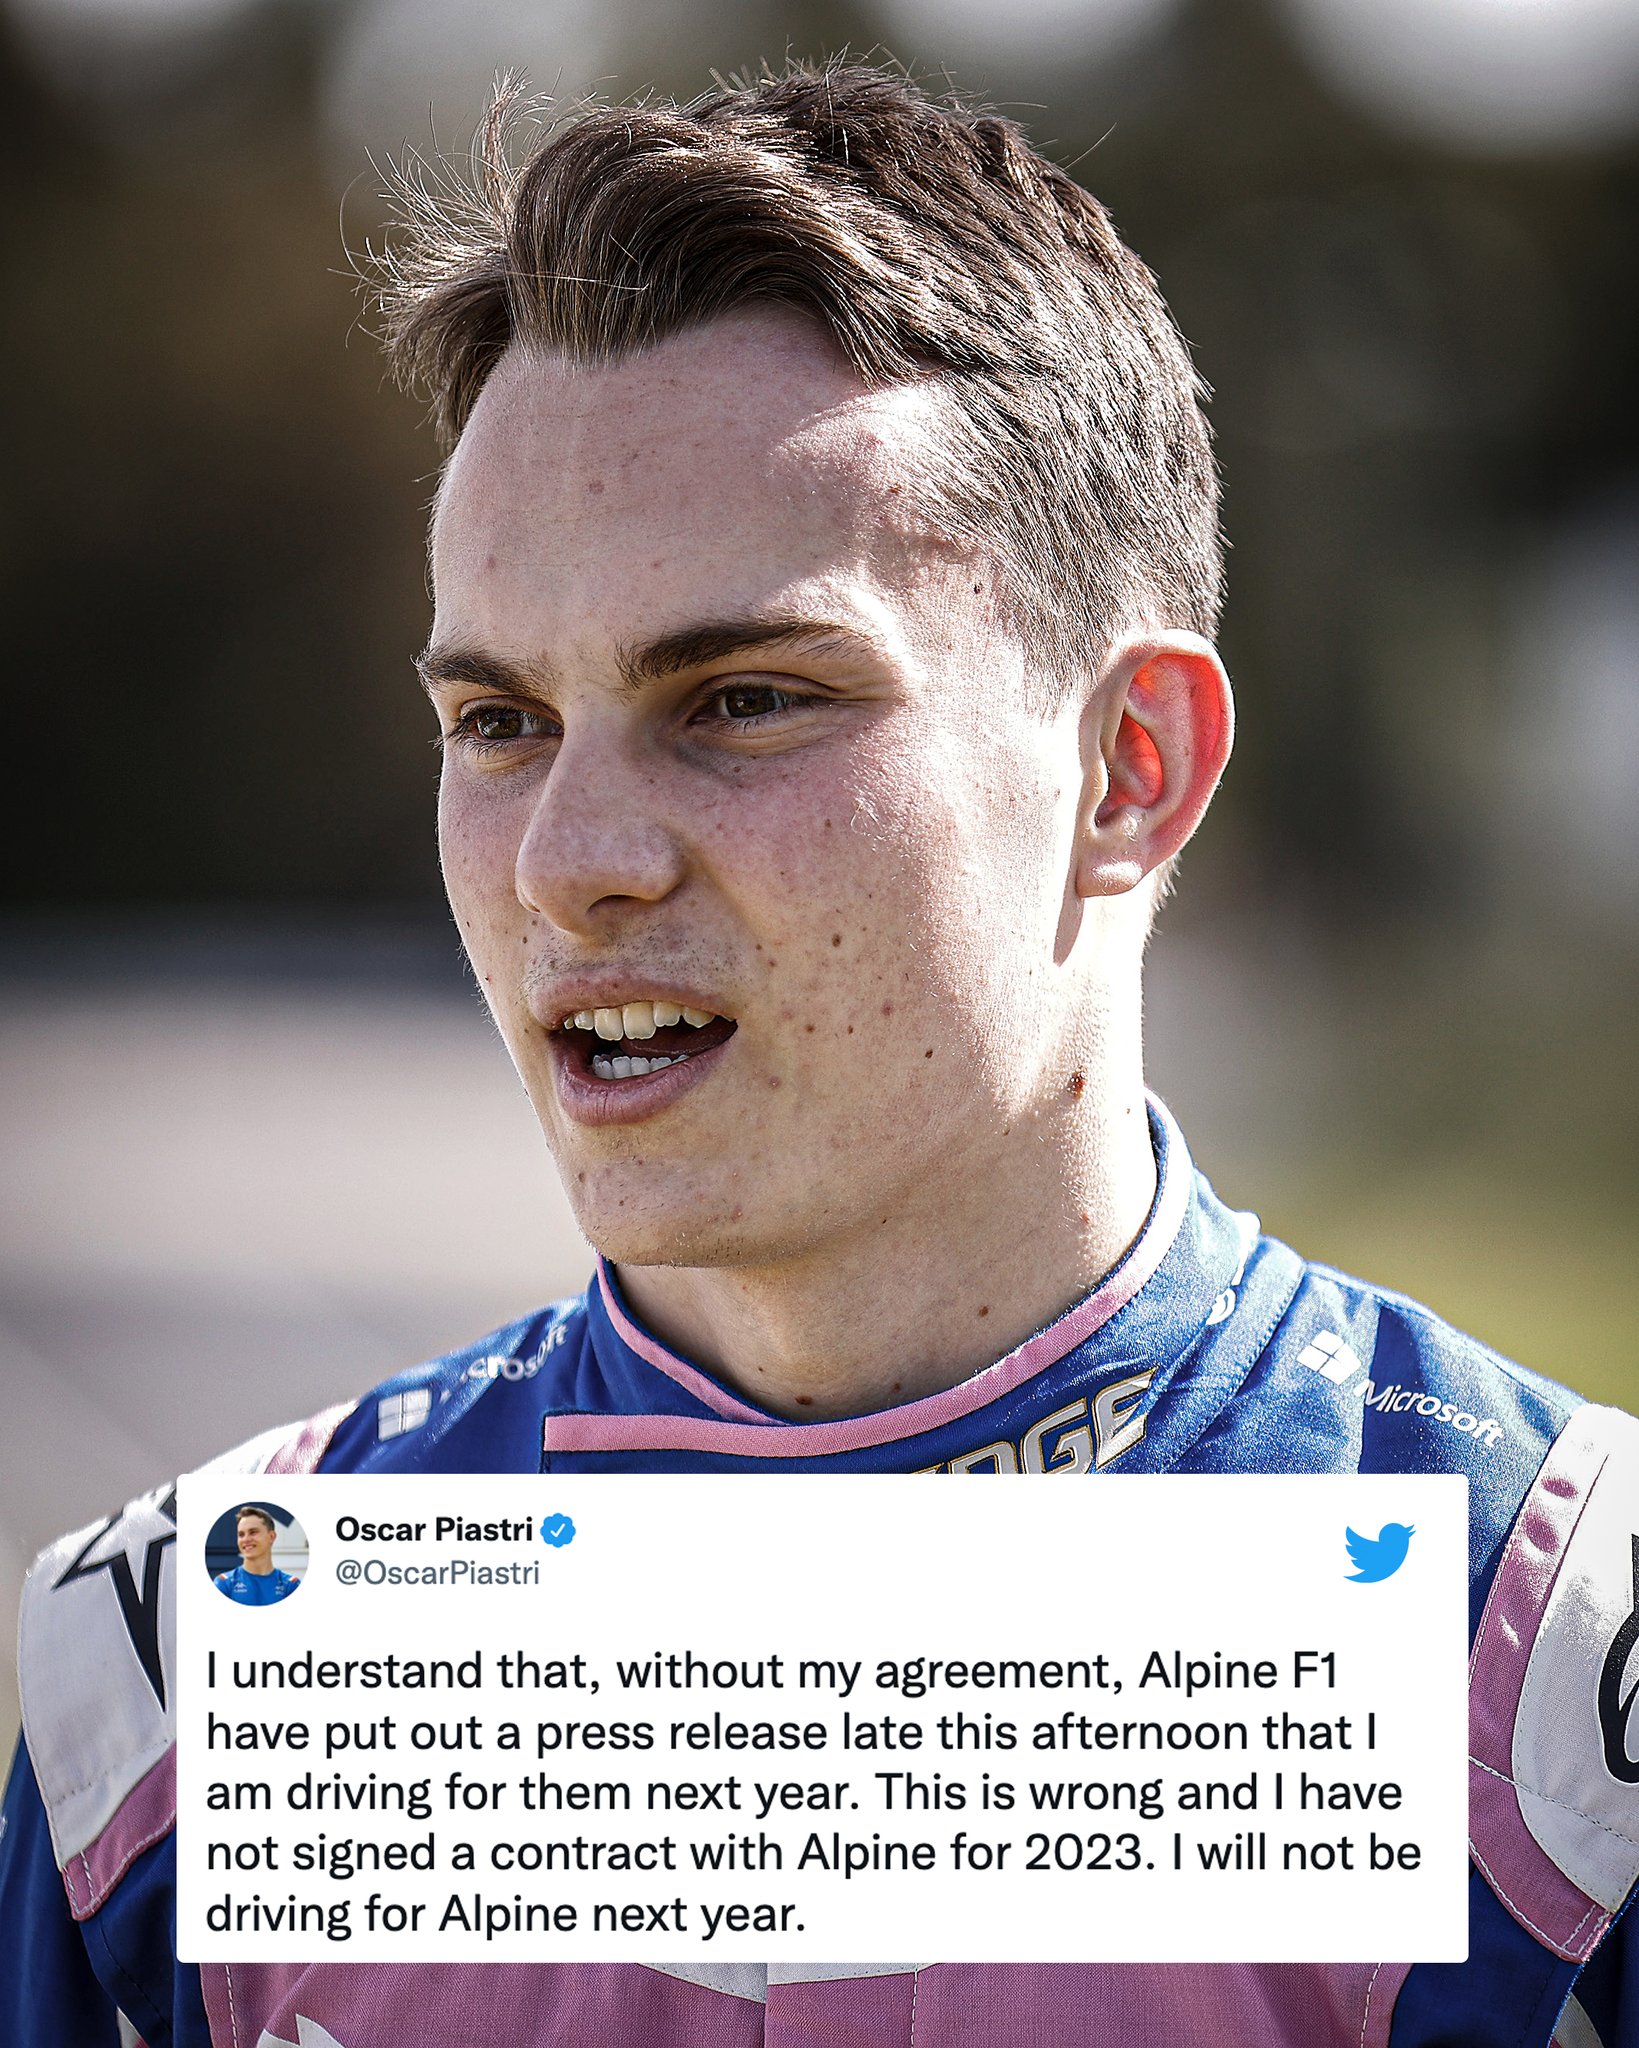 ESPN F1 on Twitter "Oscar Piastri announces he will NOT be driving for